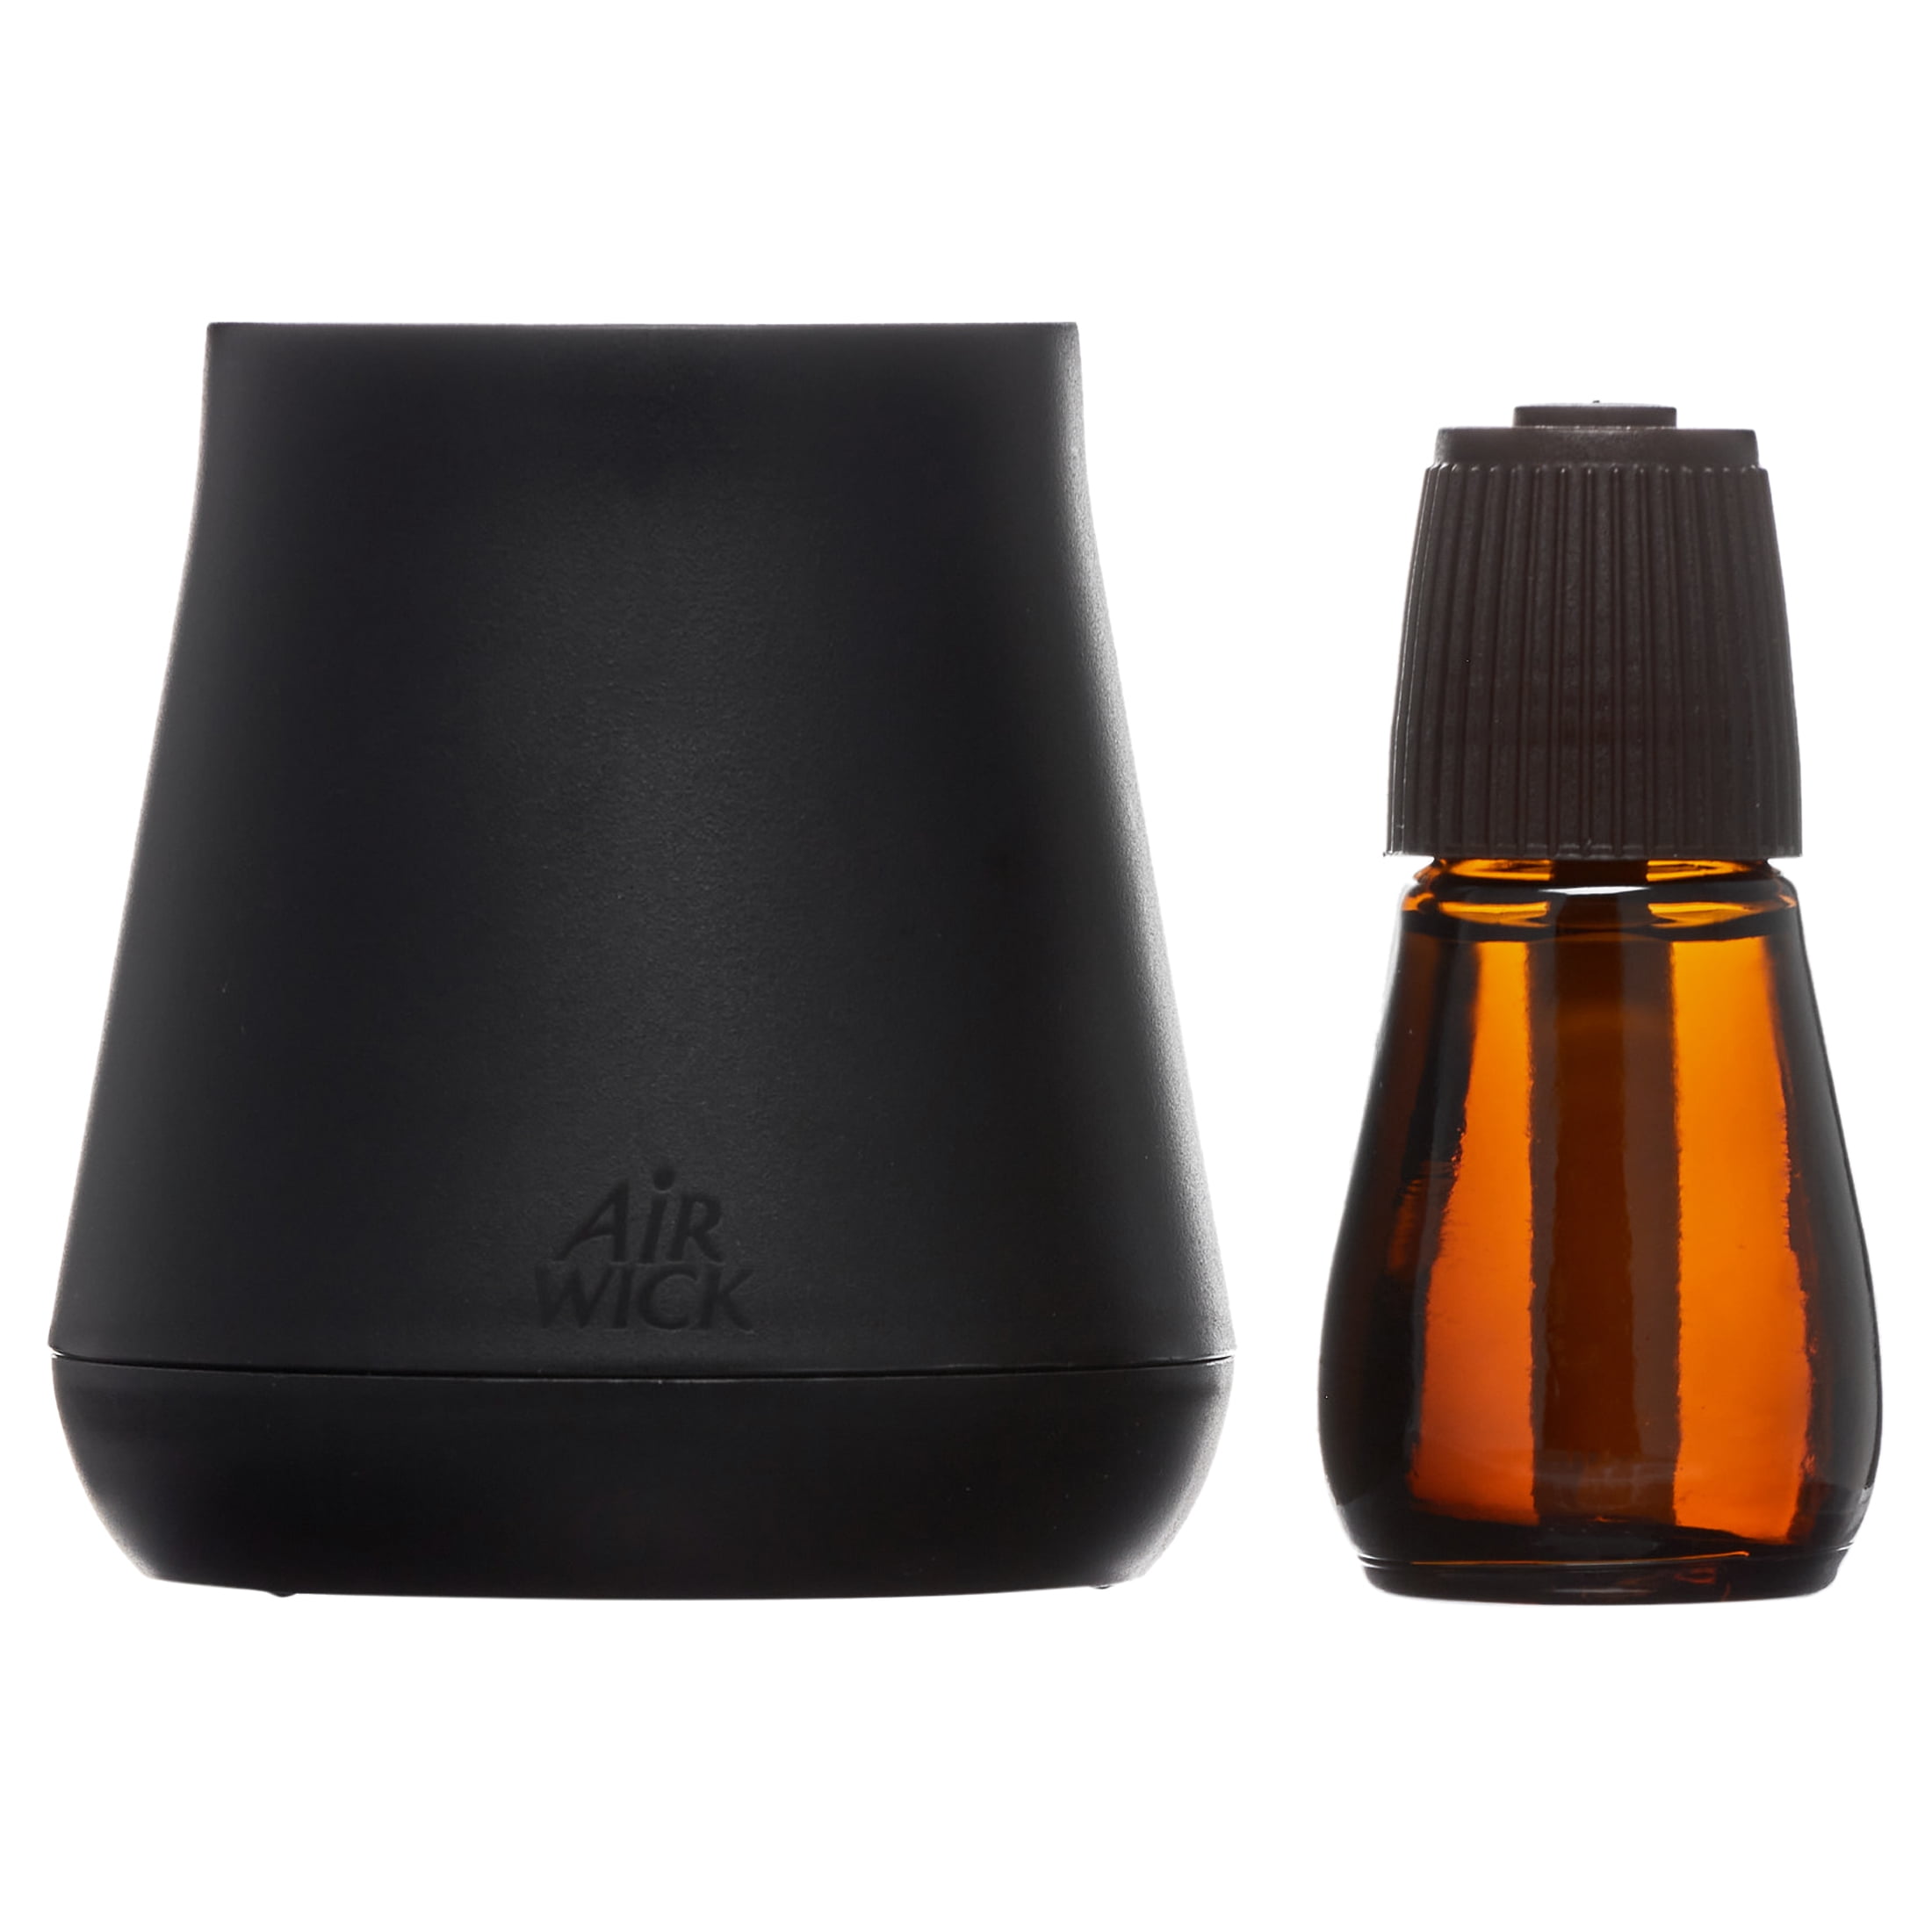 Air Wick Essential Mist Starter Kit (Diffuser + Refill), Happiness,  Essential Oils Diffuser, Air Freshener, Aromatherapy